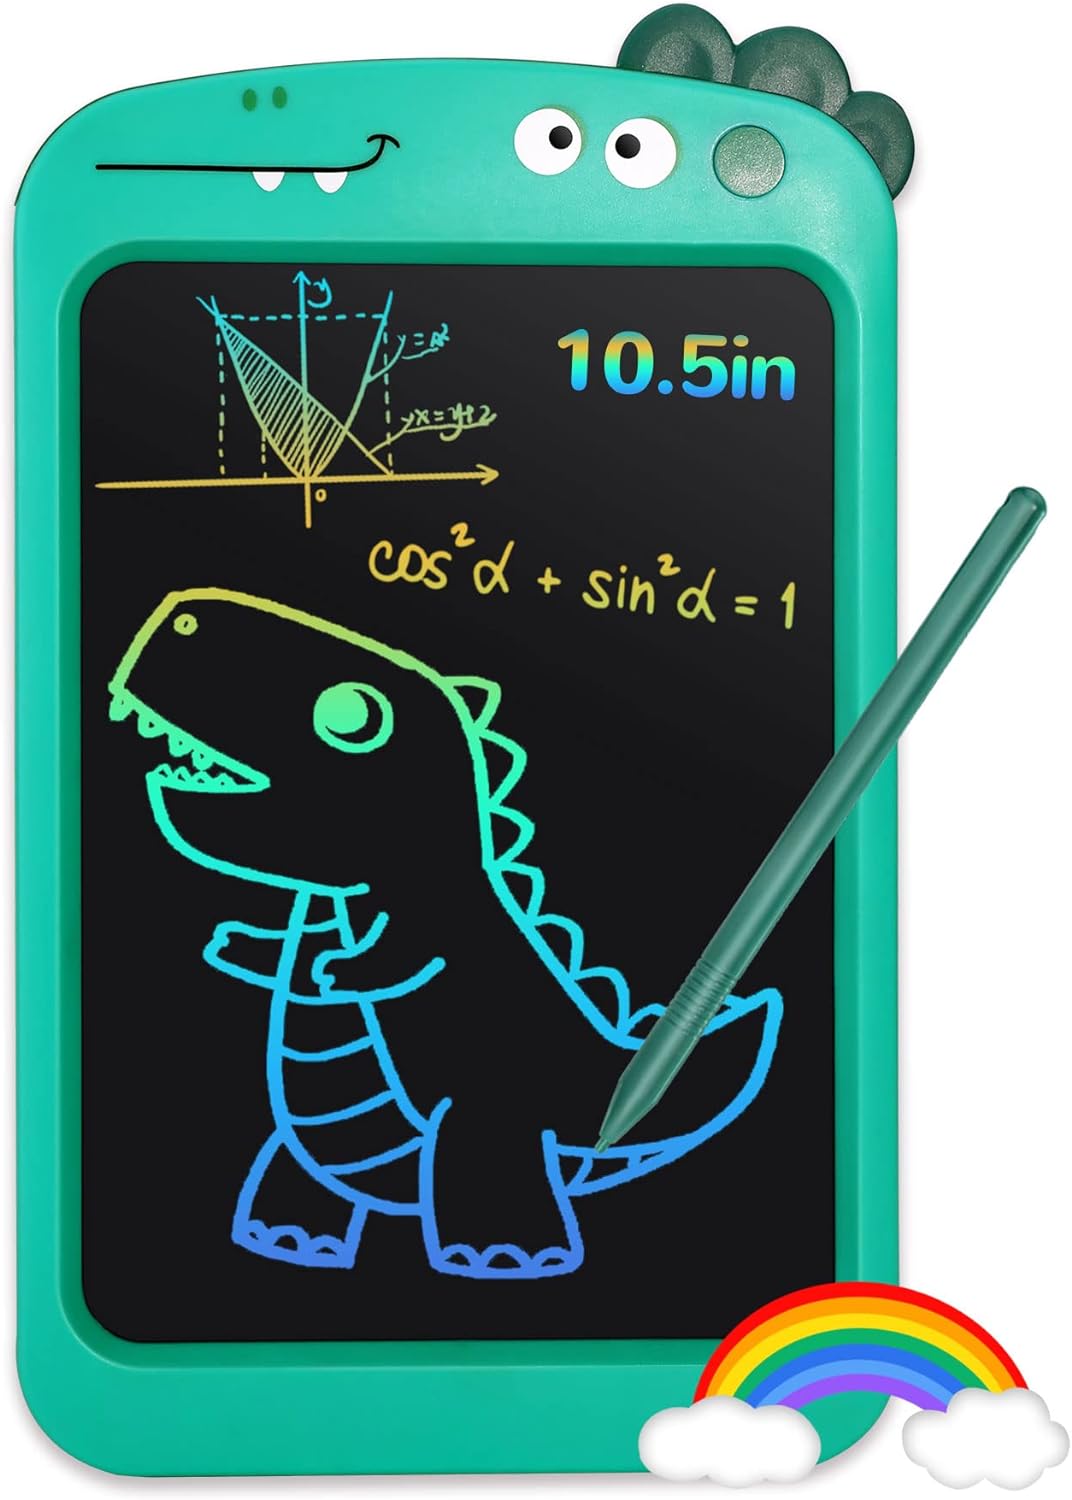 GRECHI LCD Writing Tablet,10.5inch Writing Tablet Doodle Board for Kids,Erasable Electronic Colorful Painting Pads,Learning Education Toys Gift for 3 4 5 6 7 8 Year Old Girls Boys Toddlers（Green） 